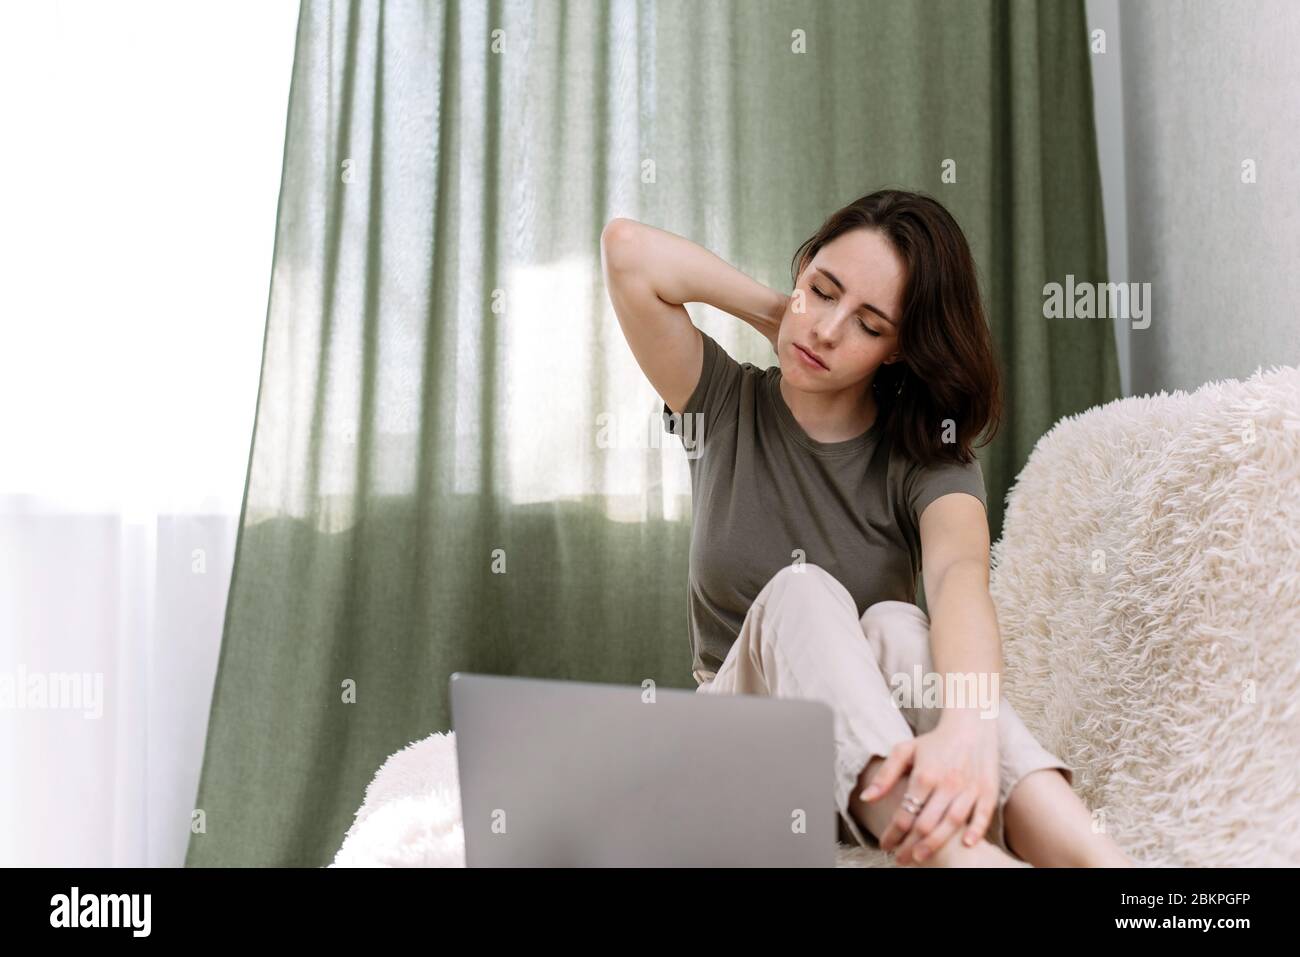 A woman works at home with a laptop and rubs her neck in pain. Pain in the neck from prolonged work at the computer. Stock Photo